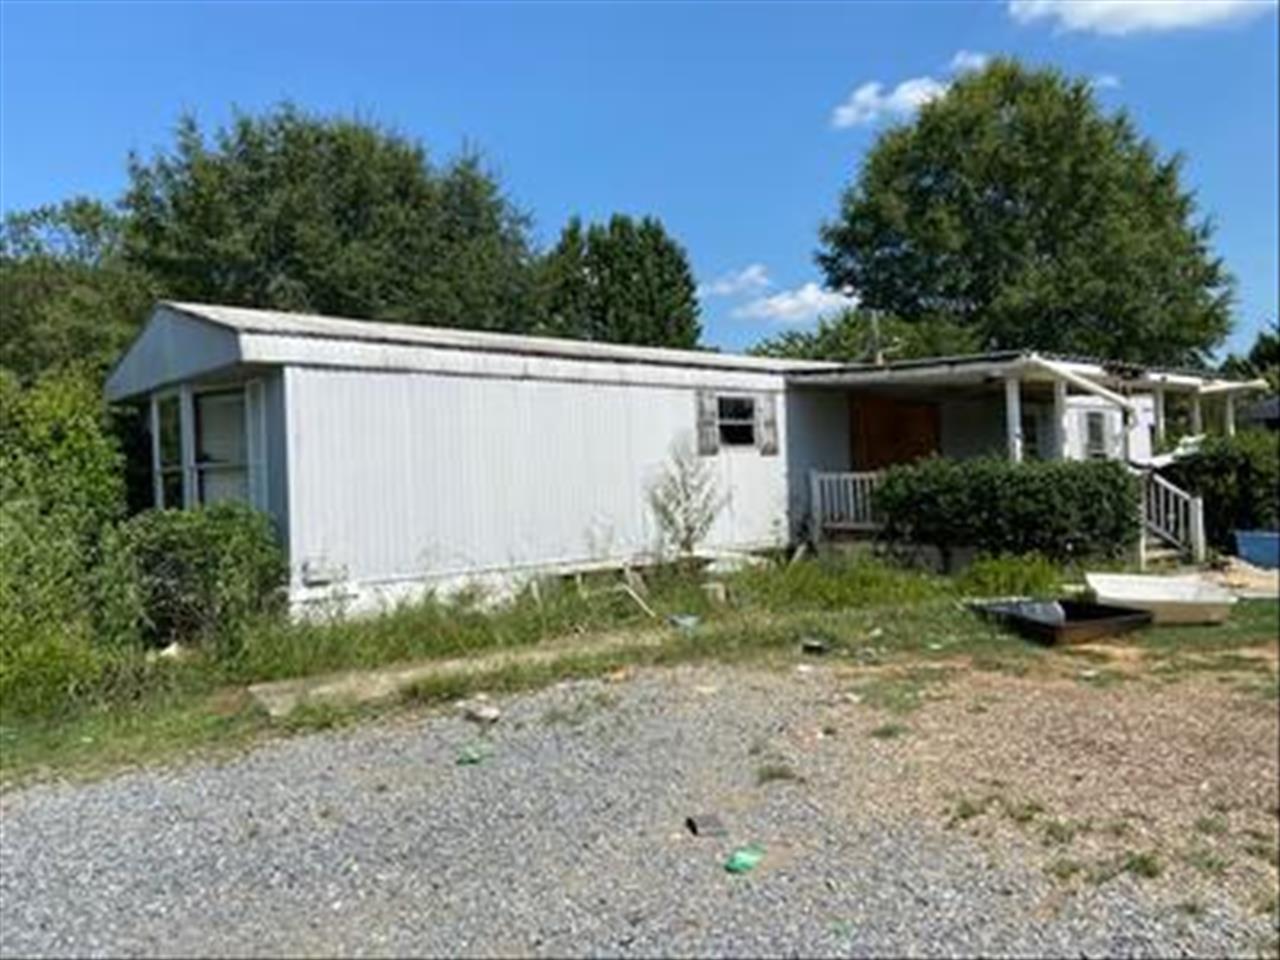 Bid4assets Com Auction Detail 965413 Bank Owned Chatsworth Ga 11303 S 225 Highway 2 Mobile Homes On A Large 2 74 Acre Lot No Reserve